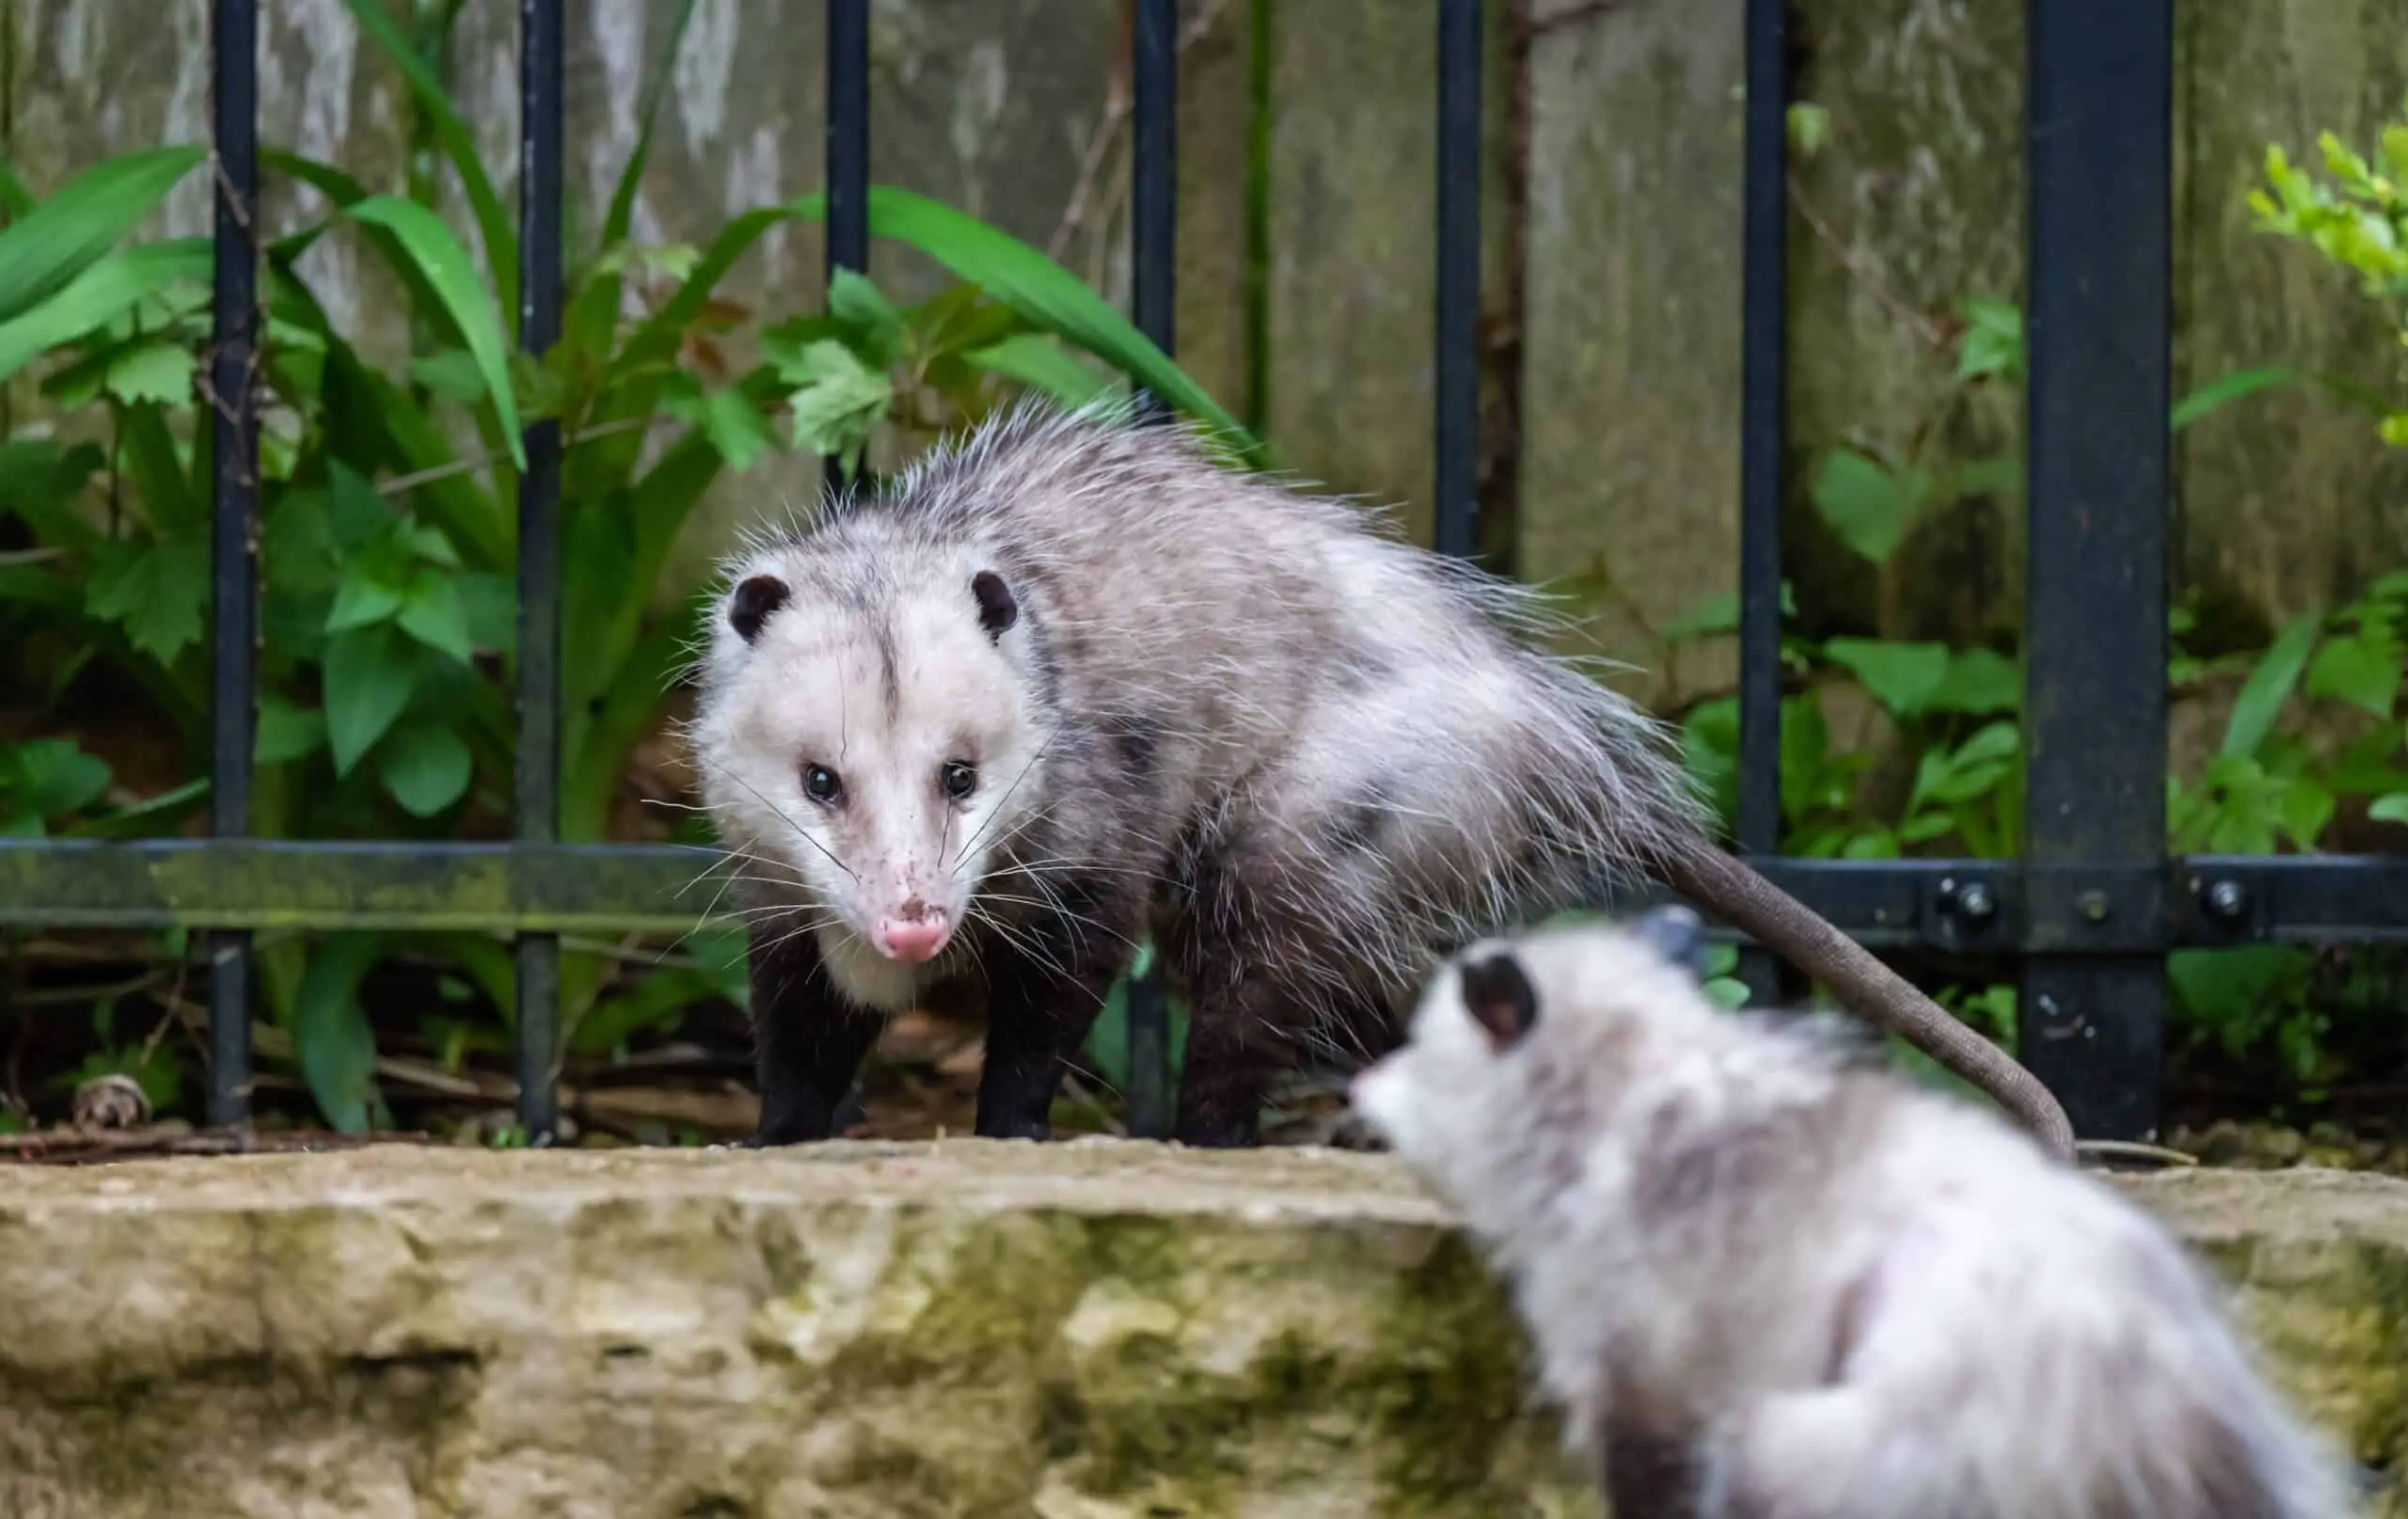 Do Opossums Eat Meat? What Animal Do They Eat For Meat? Cats?